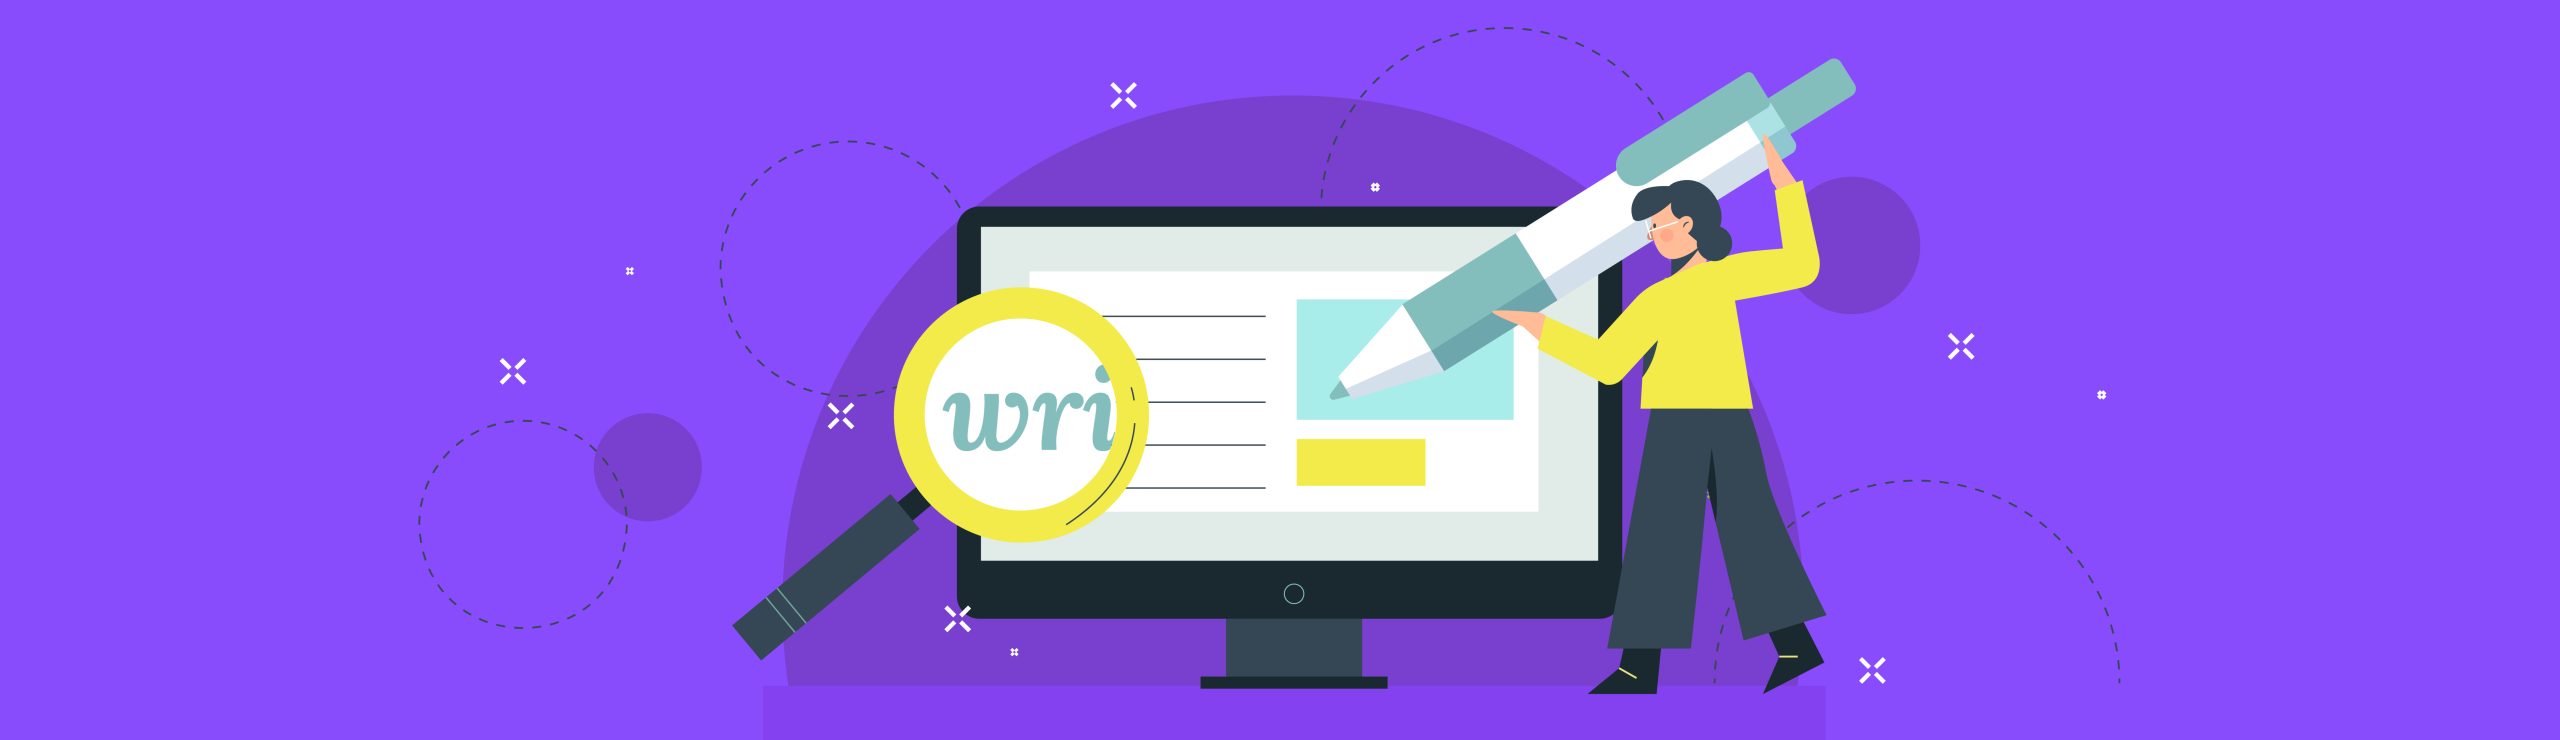 SEO Content Writing Services- The What, Why & How (+ 3 Examples)